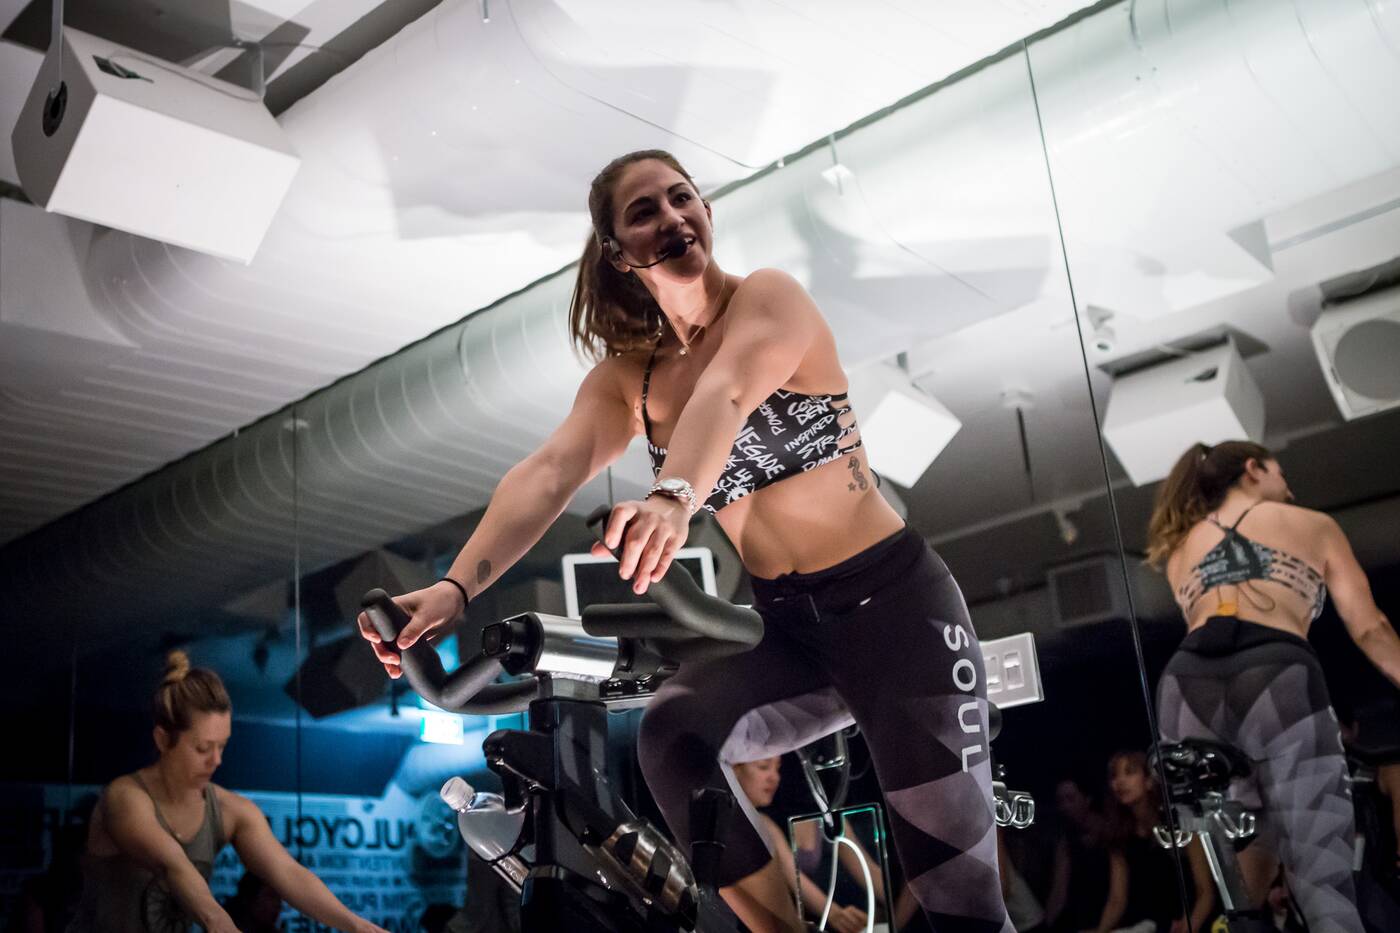 soulcycle toronto